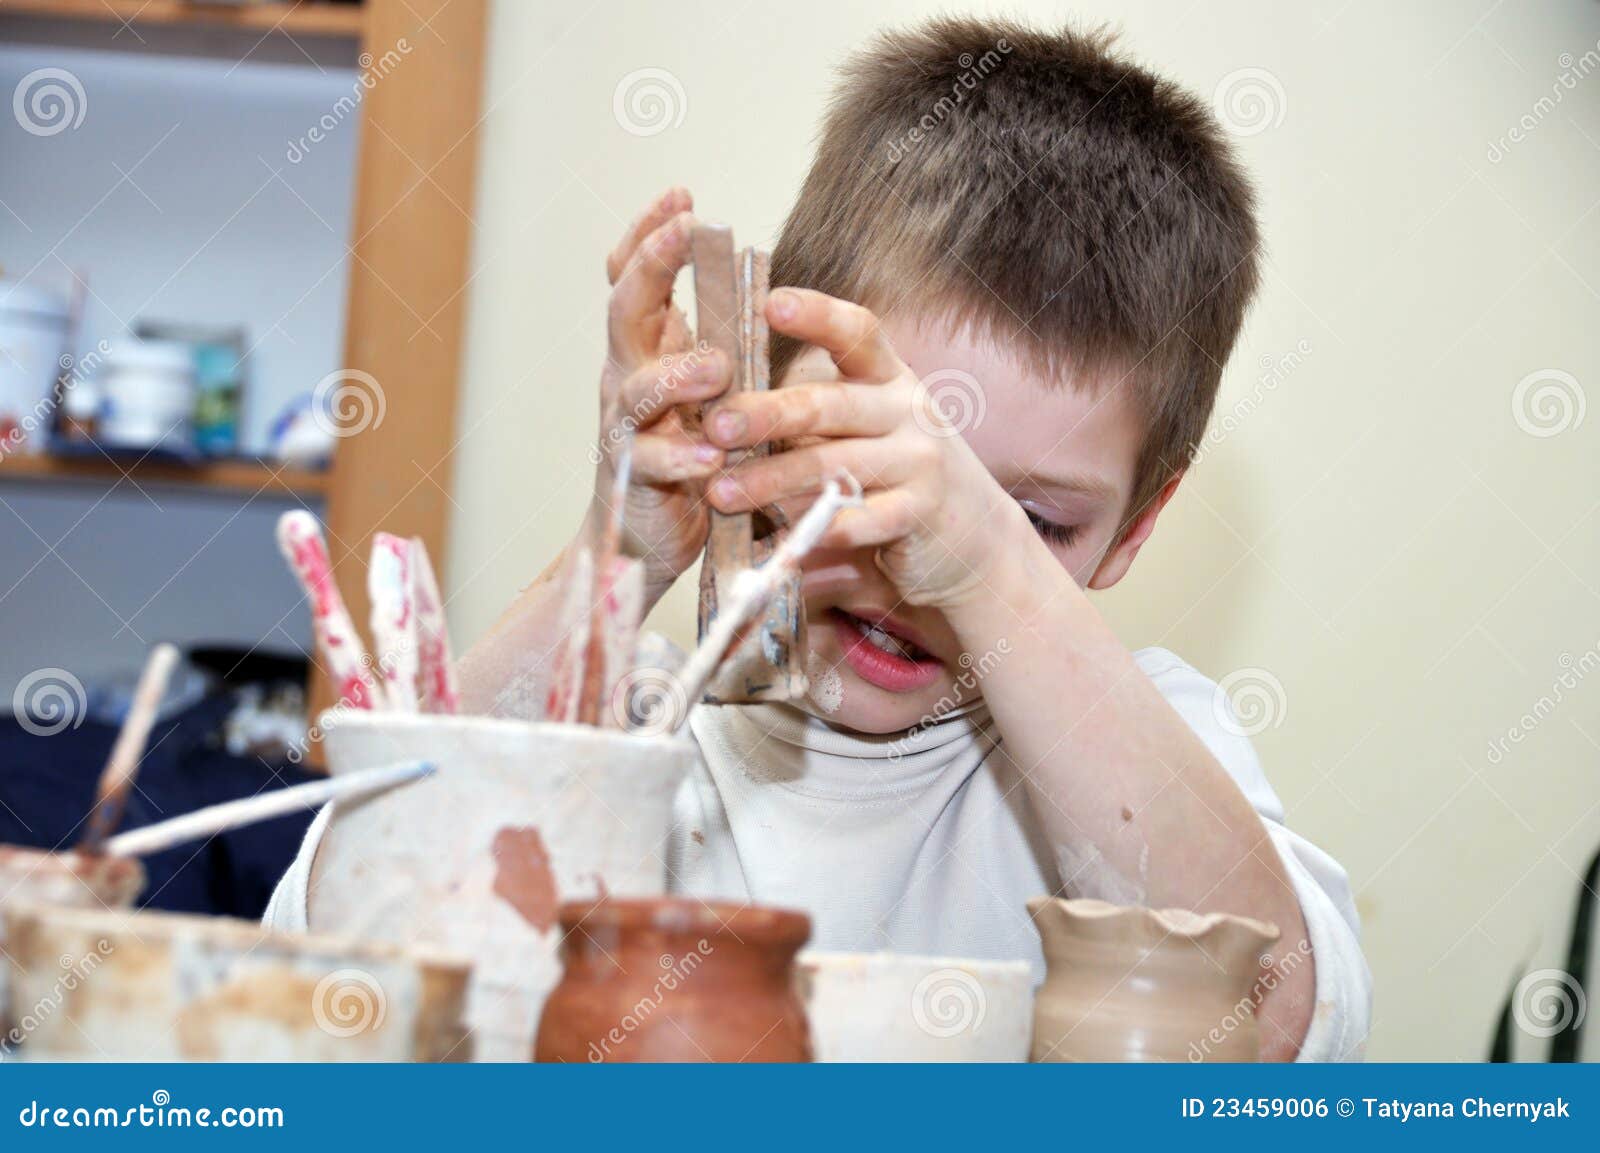 child boy shaping clay in pottery studio